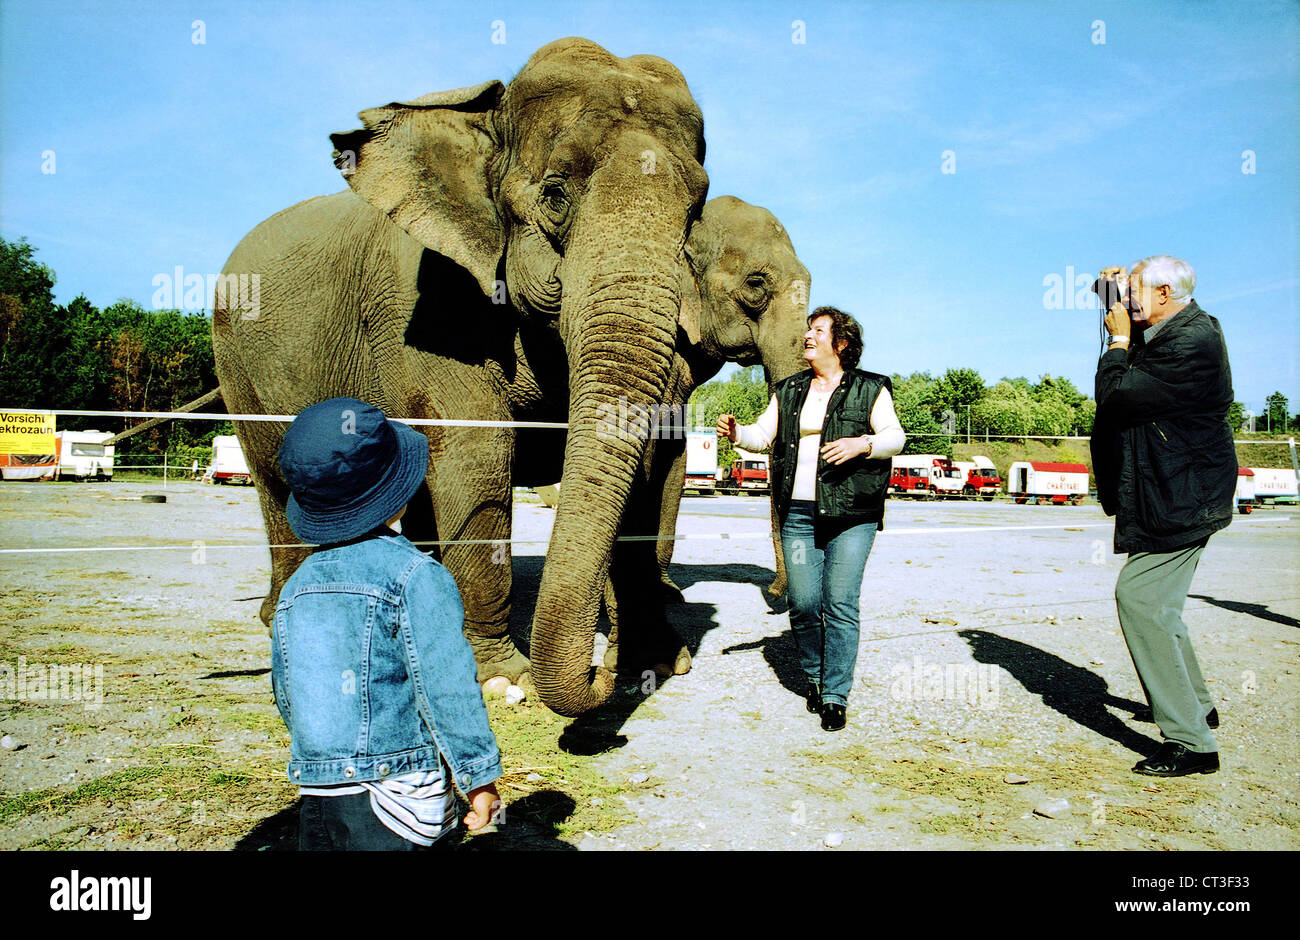 The circus elephants have visitors Stock Photo